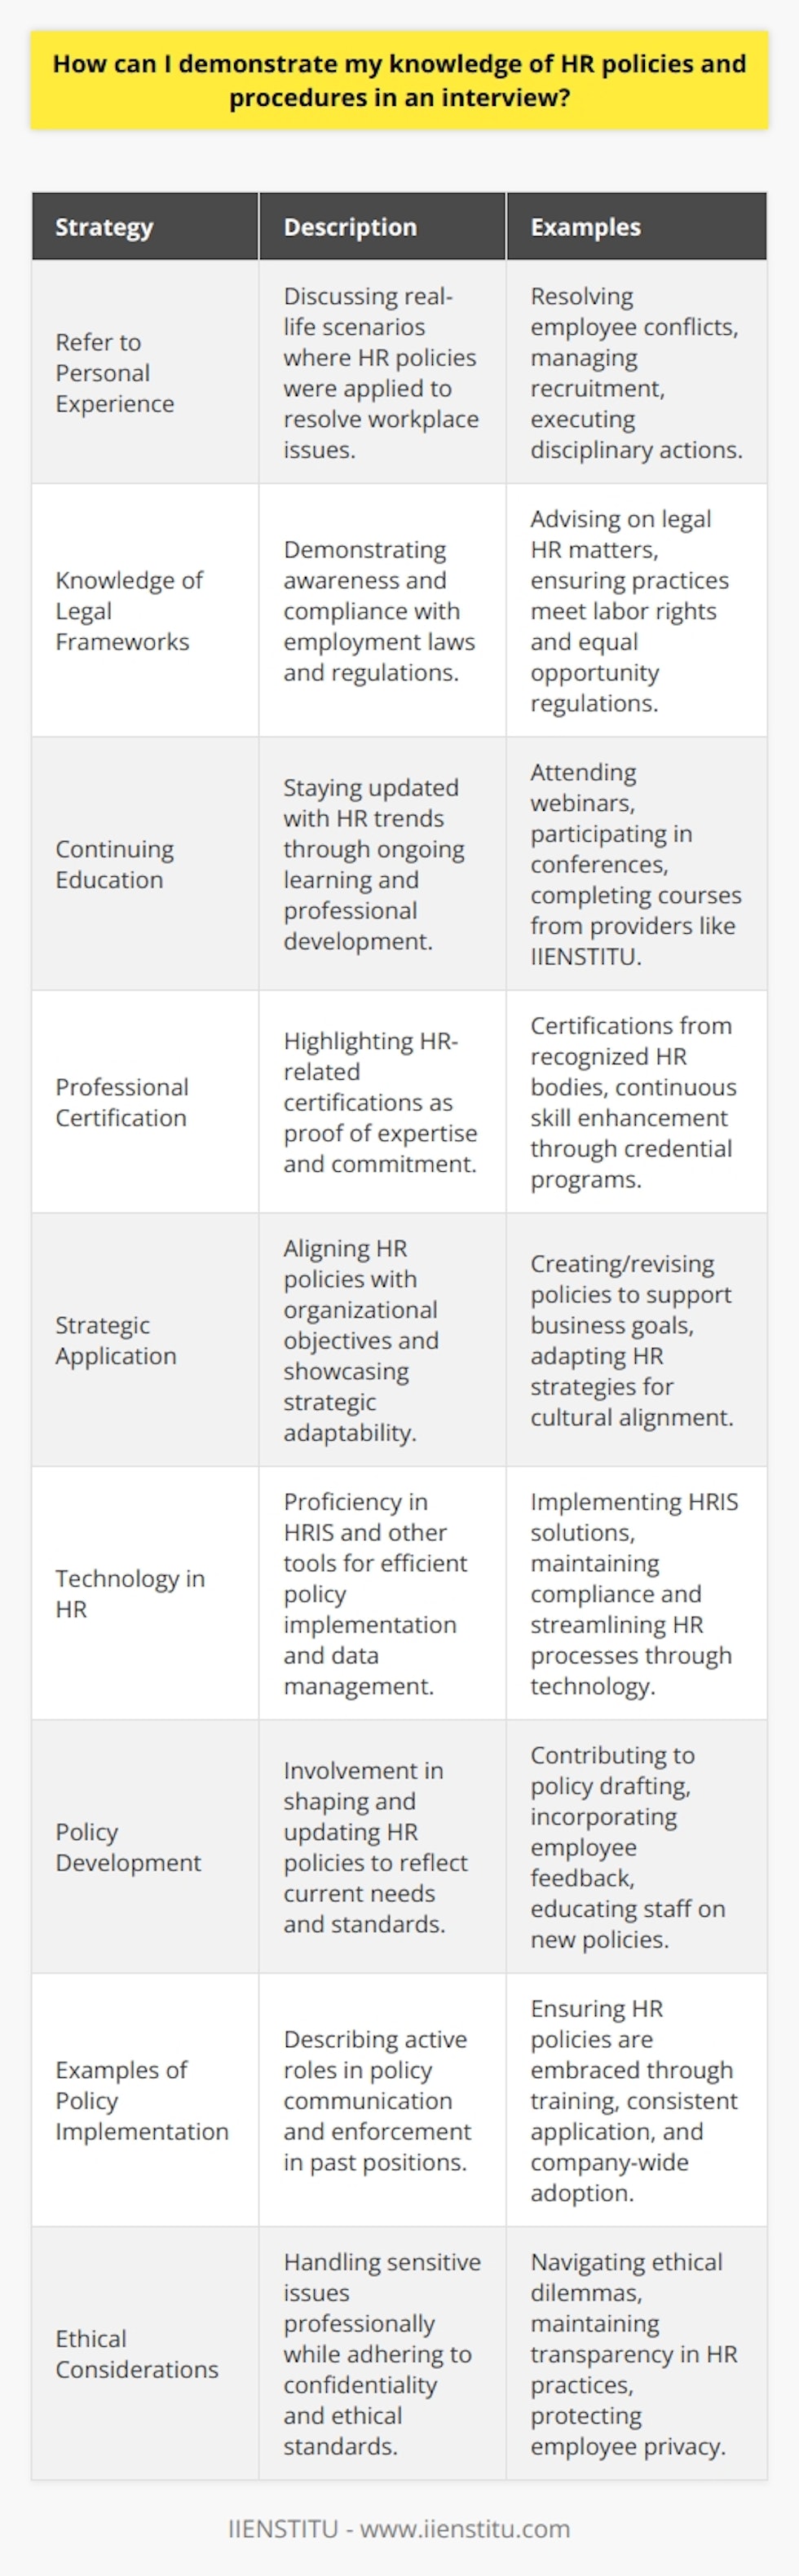 Demonstrating your knowledge of HR policies and procedures during an interview is essential to show your expertise and readiness for an HR role. Here are some strategies to help you effectively communicate your understanding and experience with HR practices:1. **Refer to Personal Experience**: Highlight specific instances from your past roles where you practically applied HR policies and procedures. Discuss situations where you resolved employee conflicts, managed recruitment processes, or executed disciplinary actions in accordance with established guidelines. By referring to real-world applications, you let the interviewer see your hands-on experience.2. **Knowledge of Legal Frameworks**: Show your awareness of the legal aspects that underpin HR policies, such as employment law, labor rights, and equal opportunity regulations. Discuss how you've ensured that HR practices complied with these laws, or how you advised management on legal matters related to HR. This can demonstrate your understanding of the critical importance of compliance in HR functions.3. **Continuing Education**: Explain how you stay current with the latest HR developments, such as new legislation, industry best practices, or emerging trends in the workforce. Mention webinars, conferences, or specific courses you have taken from professional development providers like IIENSTITU that have enabled you to keep your knowledge up-to-date.4. **Professional Certification**: If you hold certifications from recognized bodies in the HR field, mention these as evidence of your professional commitment and knowledge base. Speak about how the process of obtaining these credentials has deepened your understanding of HR policies and procedures.5. **Strategic Application**: Demonstrate your comprehension by discussing how you would create or revise HR policies to align with organizational goals and culture. Present hypothetical scenarios or past experiences where you’ve had to adapt HR strategies to support business objectives, which showcases your strategic thinking.6. **Technology in HR**: Speak about your competency in using Human Resource Information Systems (HRIS) and other software tools to maintain compliance, manage employee data, and streamline HR processes. Understanding technological tools is often essential for implementing and monitoring HR policies efficiently.7. **Policy Development**: Share instances where you were involved in the development or overhaul of HR policies. This could range from contributing to the drafting process, collecting employee feedback, to assisting in the roll-out and education of the new policies to the workforce.8. **Examples of Policy Implementation**: Describe how you have contributed to the communication and enforcement of HR policies in your previous jobs. Explain how you ensure that policies are not just implemented, but also embraced by the workforce through training and consistent application.9. **Ethical Considerations**: Discuss how you handle ethical dilemmas and maintain confidentiality, showing your understanding of the professional standards expected in HR. Address how you have navigated sensitive situations while adhering to ethical guidelines and maintaining a transparent HR environment.By integrating these elements into your interview responses, you can effectively demonstrate a strong knowledge base and a proactive approach to HR policy management, marking you as a well-prepared and knowledgeable candidate for any HR position.